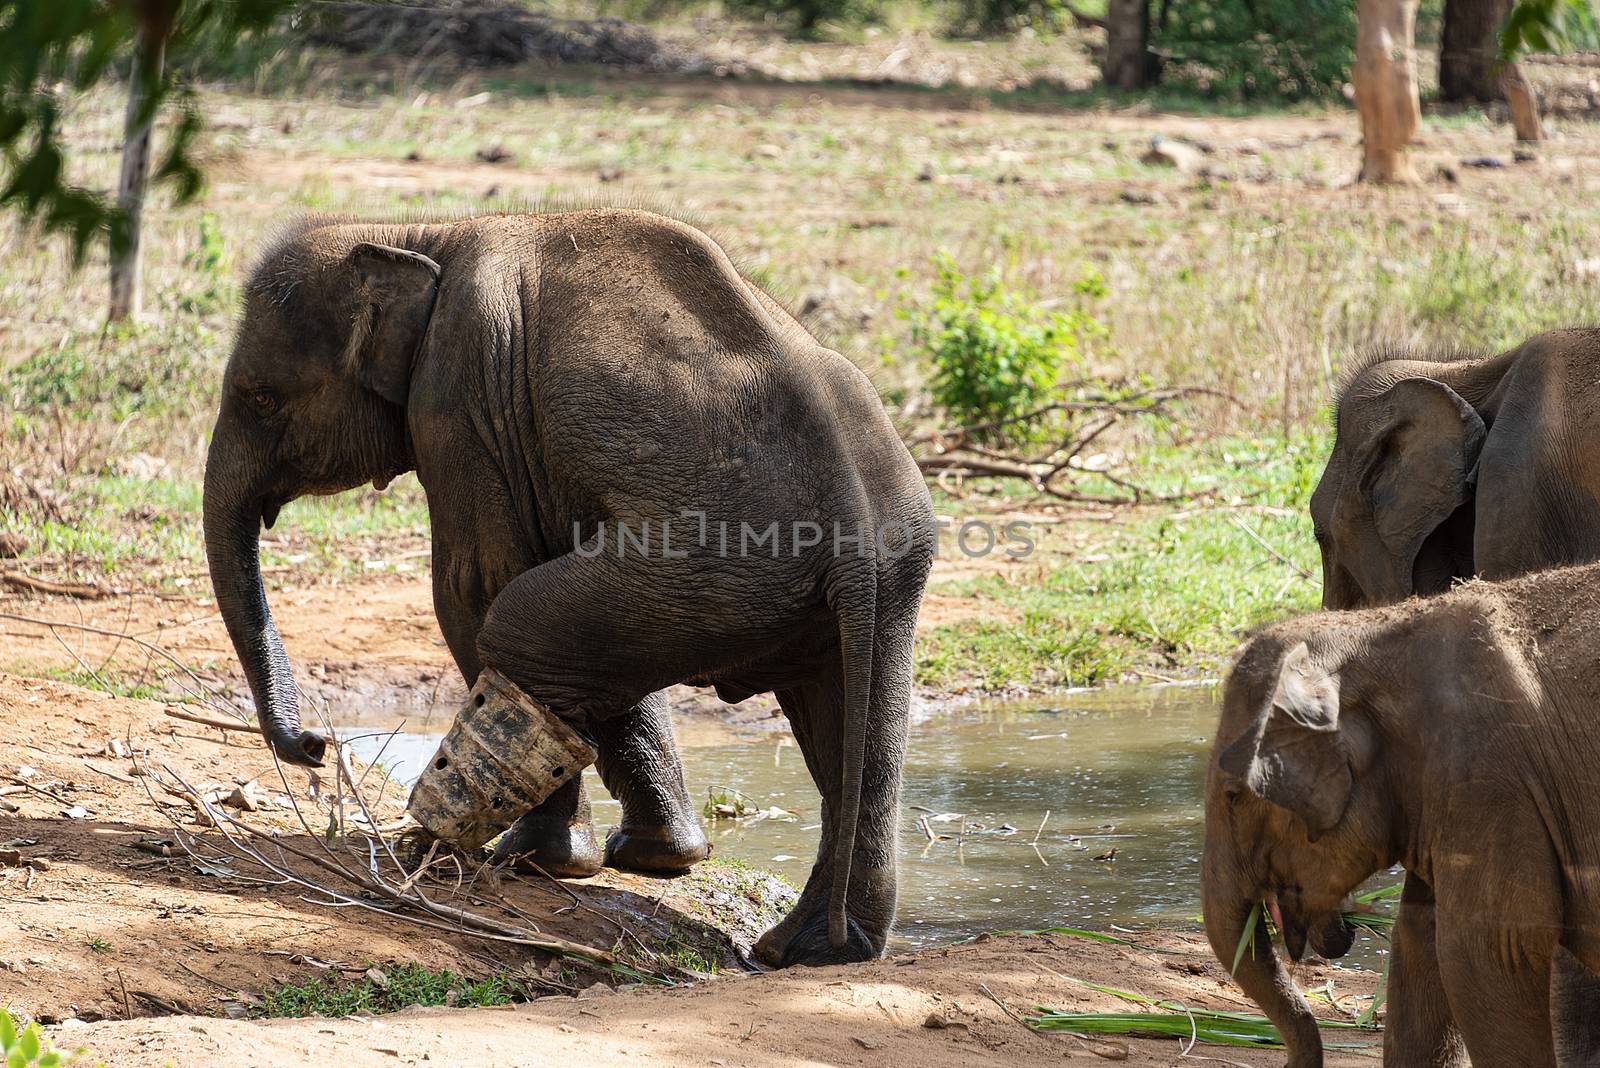 Sri Lanka, - Sept 2015: At the Udewalawe, Elephant transit home , a young elephant wears a protective boot while recovering after being caught in a snare